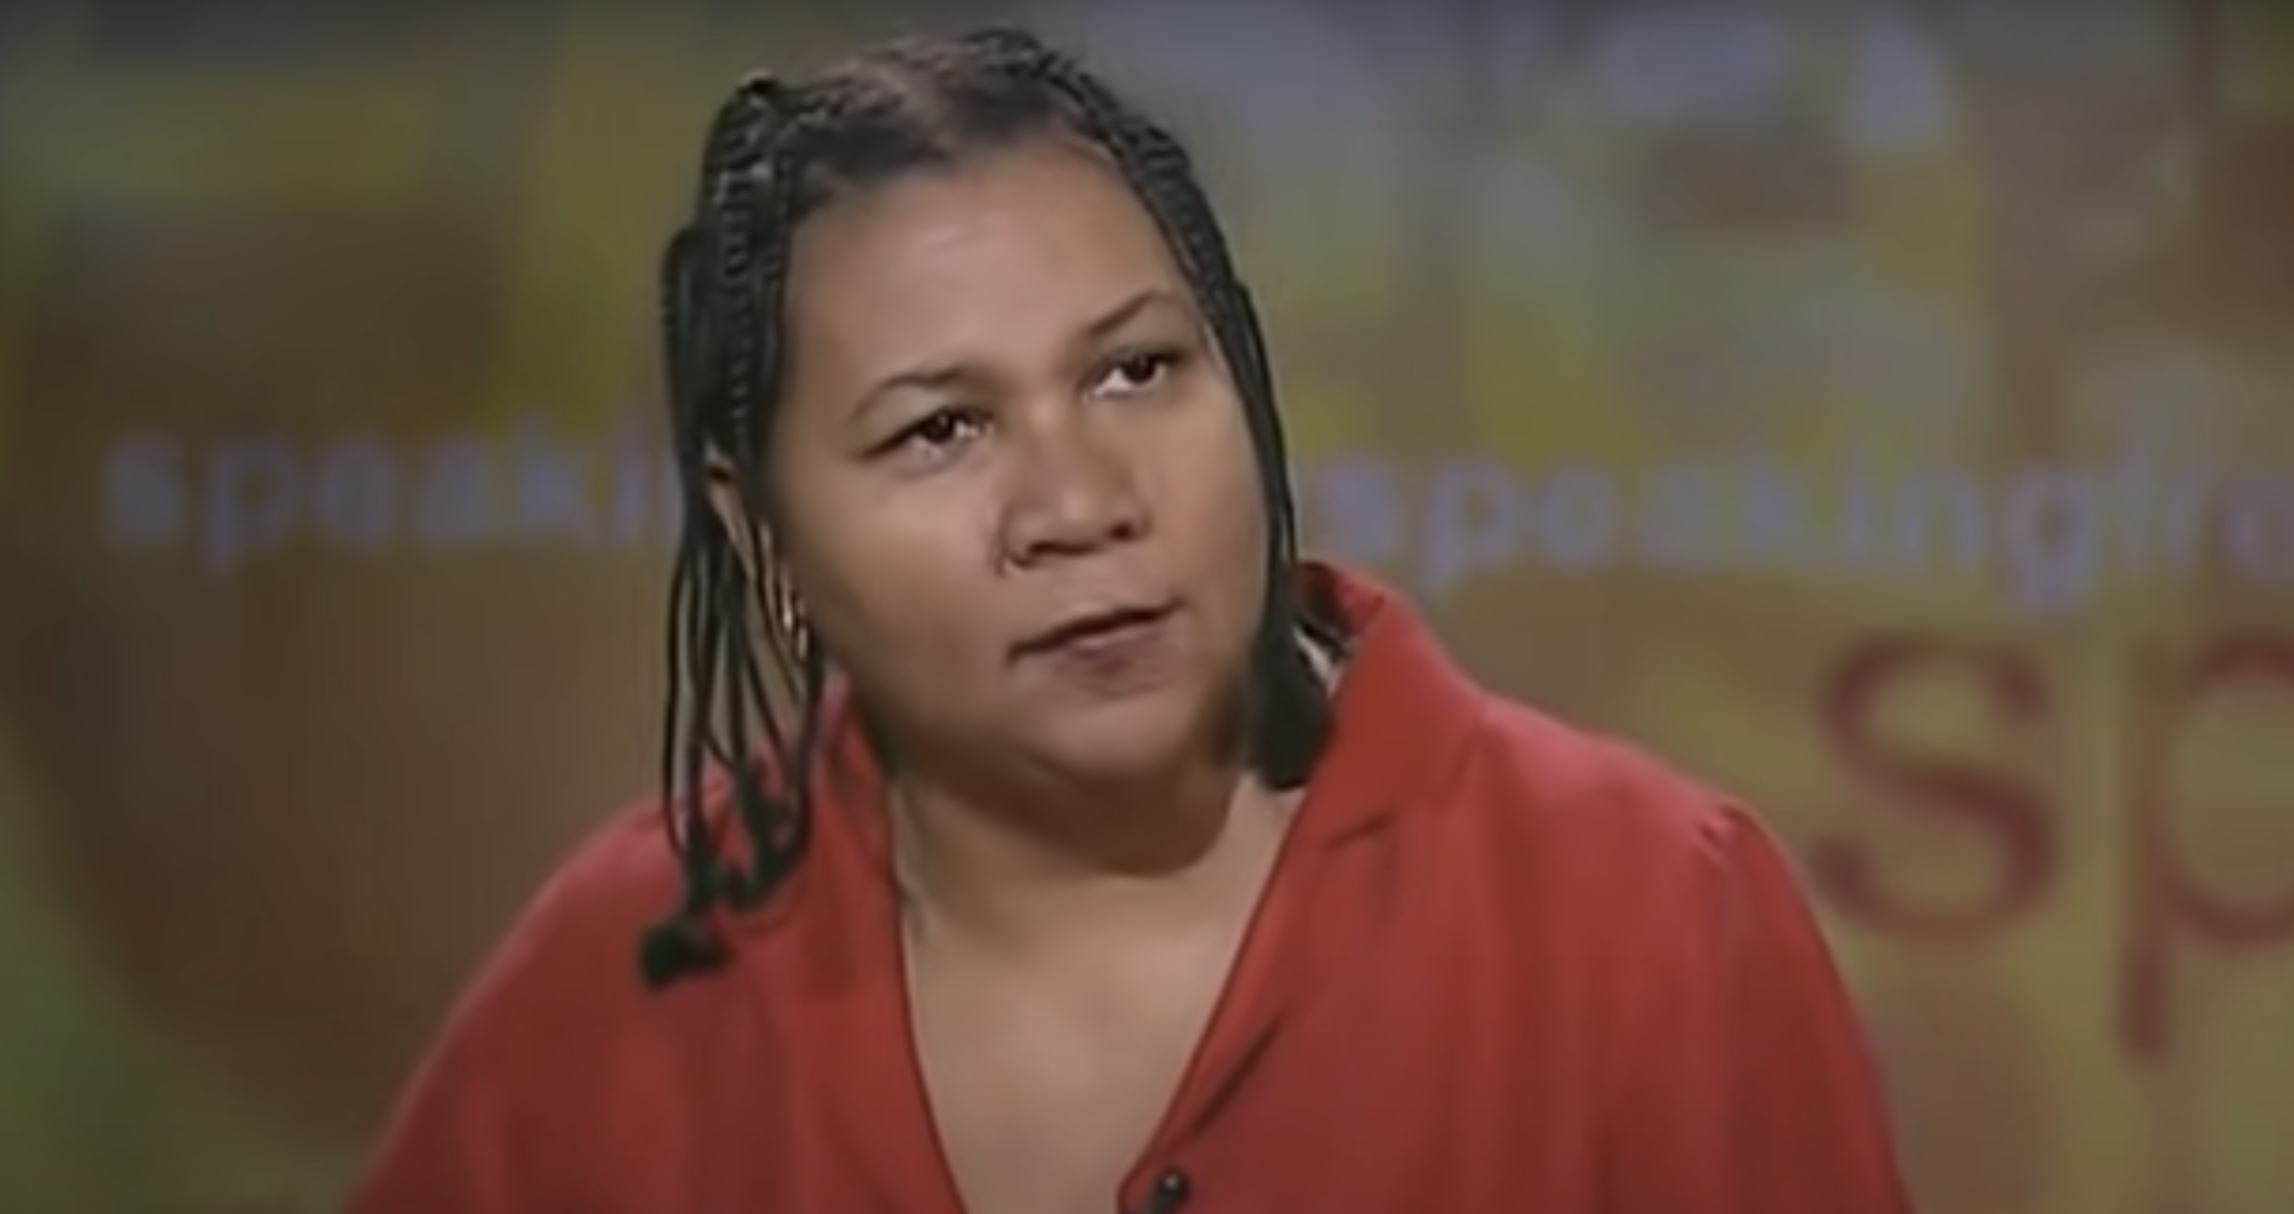 Iconic Black Feminist and Public Intellectual bell hooks Has Passed Away - RELEVANT